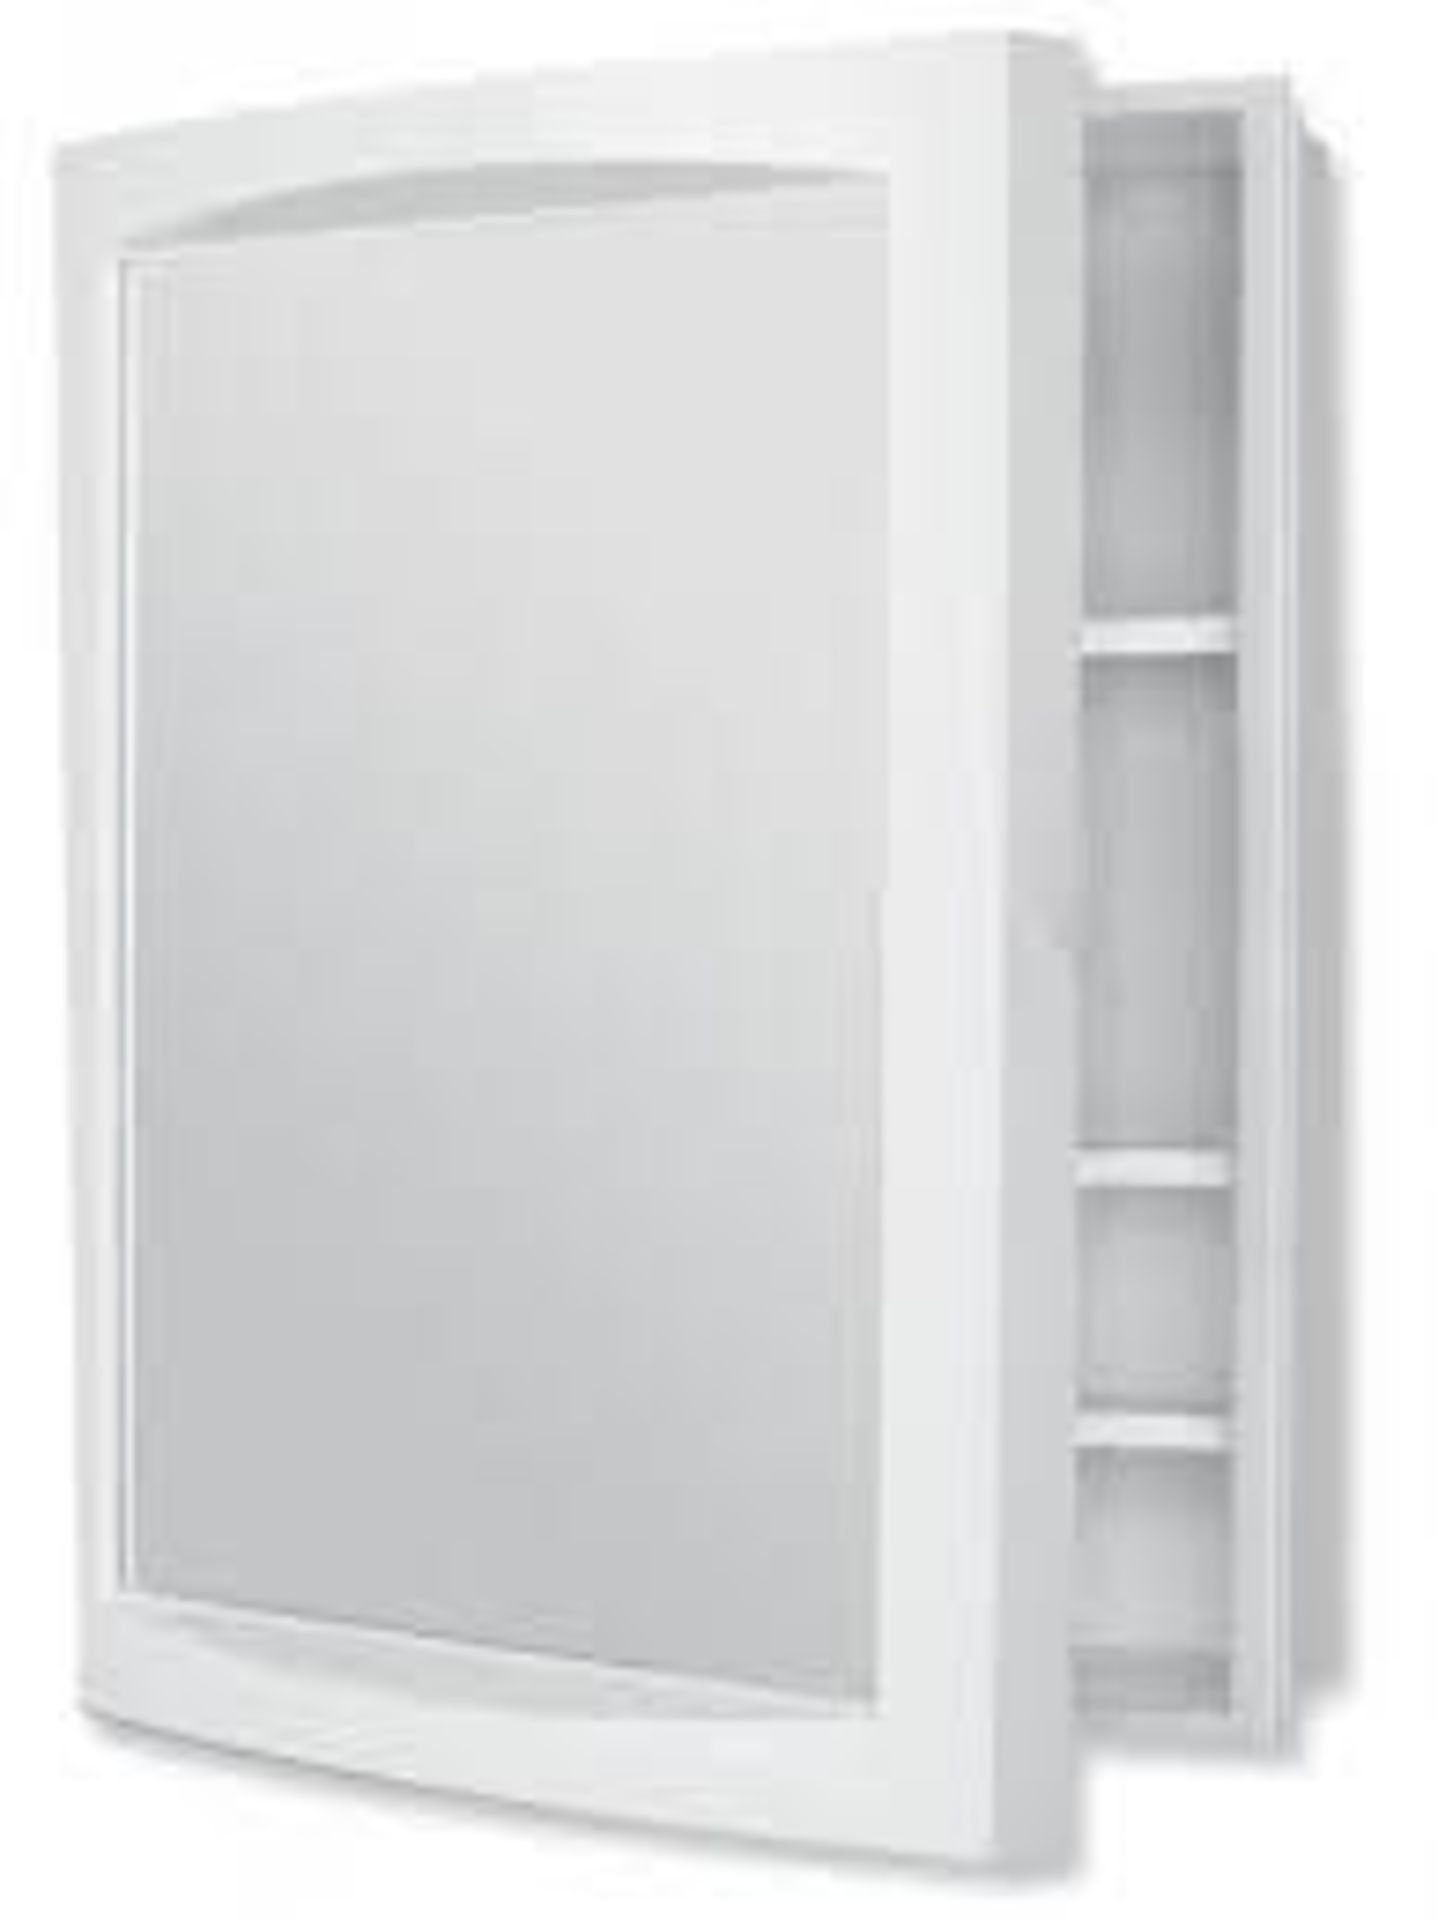 Aida White Single Cabinet with Mirrored door. - PW.